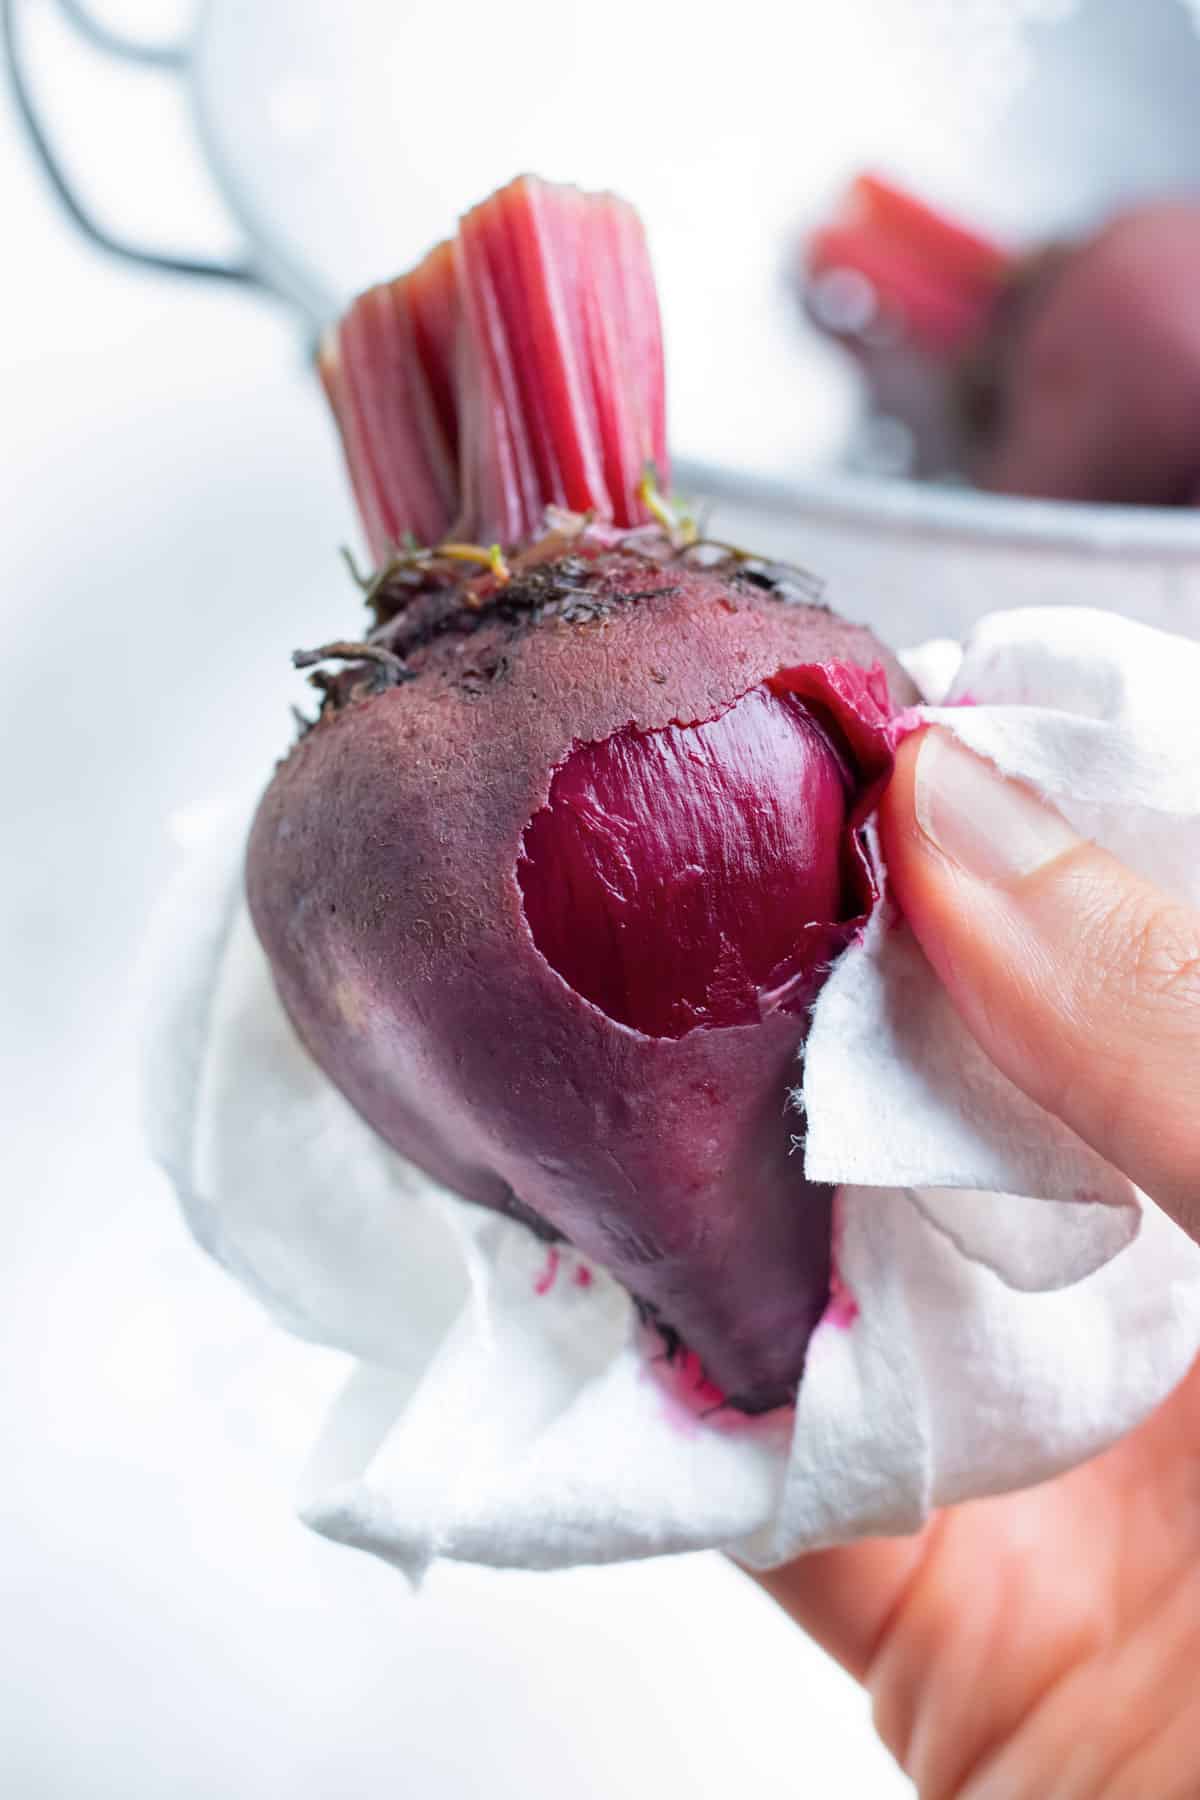 After boiling, outer beet skins are peeled.